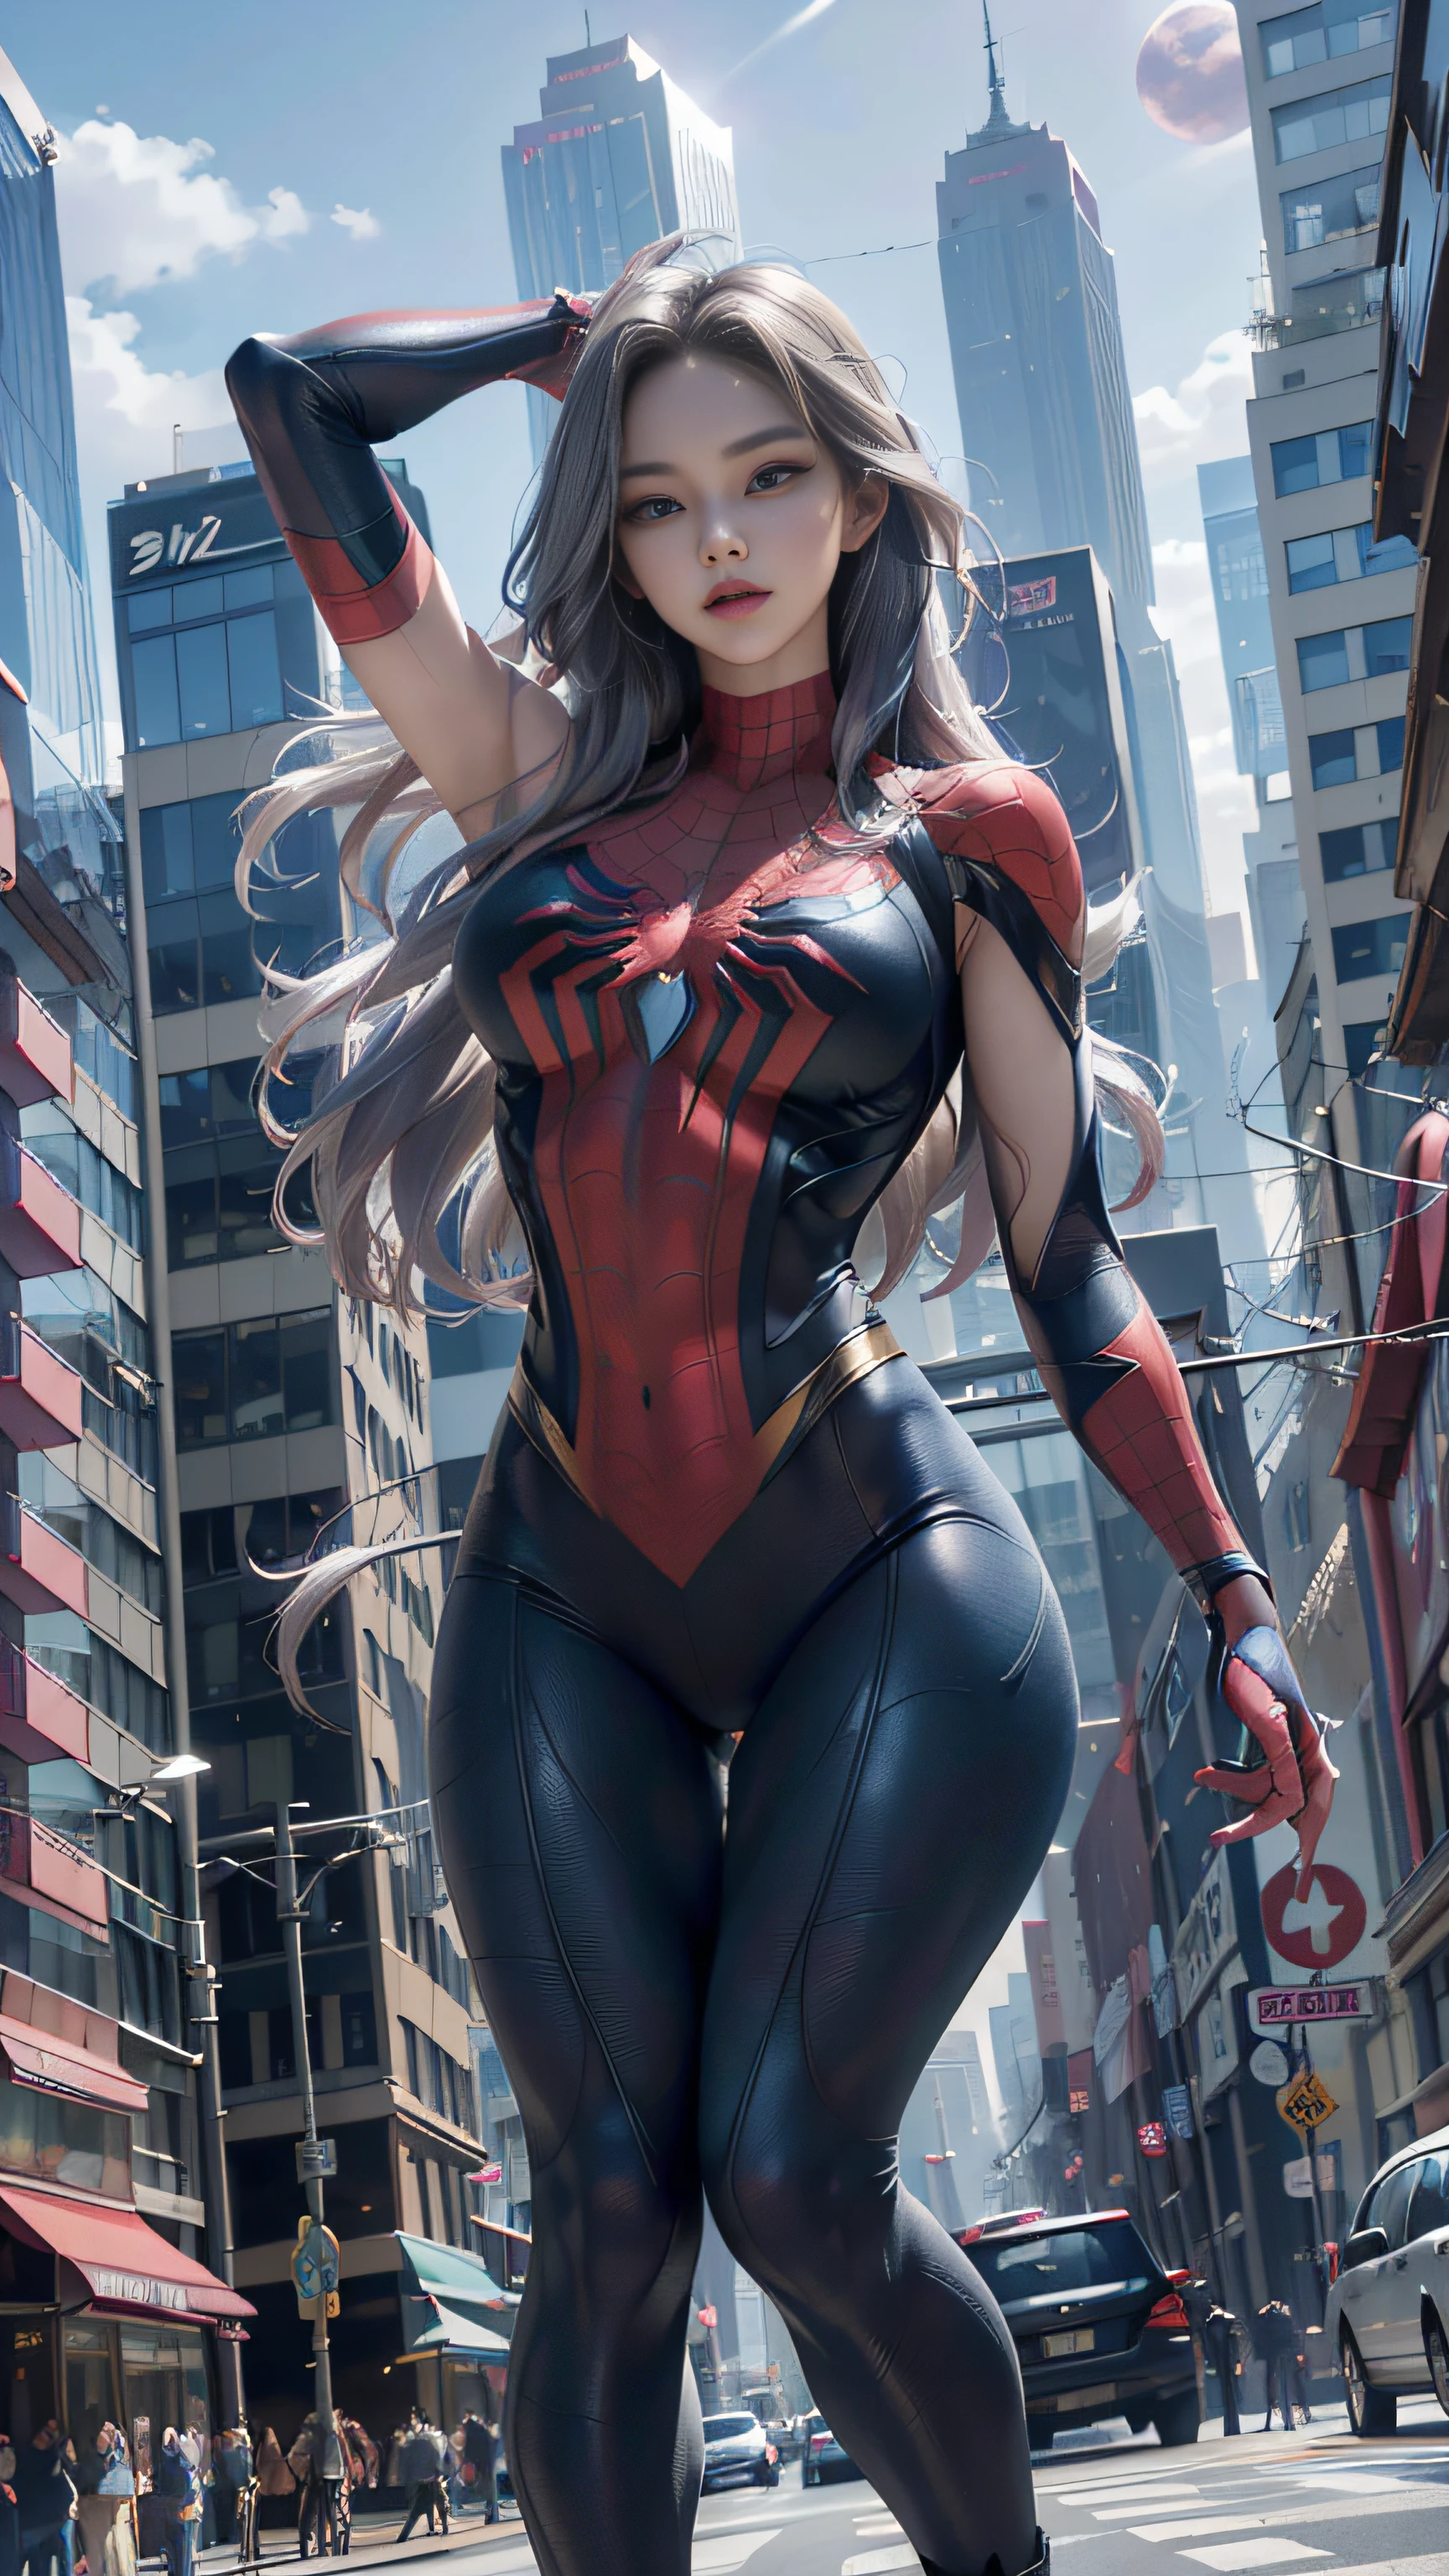 Super beautiful shining eyes、(​masterpiece、4K resolution、A hyper-realistic、ighly detailed)、(White Superhero Theme、Charisma、There's a girl in a Spider-Man costume over town、She's a superhero)、 [((17 age)、(Long grey hair:1.2)、A half body、(blue eyess:1.2)、((Spider-Man pose)、show of strength、Jump from one building to another)、((Sandy urban environment):0.8)|(A city scape、natta、Dinamic Light)、(fullmoon)]#illustrate:Prompts are mainly ultra high definition、very real、Describes highly detailed 4K paintings。A superheroine in a Spider-Man costume is depicted at the top of the city。The theme of the picture is white superhero theme、The female protagonist has long white hair and、At the age of 25、Her whole body is shown in the painting。In terms of depicting the actions of superheroines、Spiders are employed